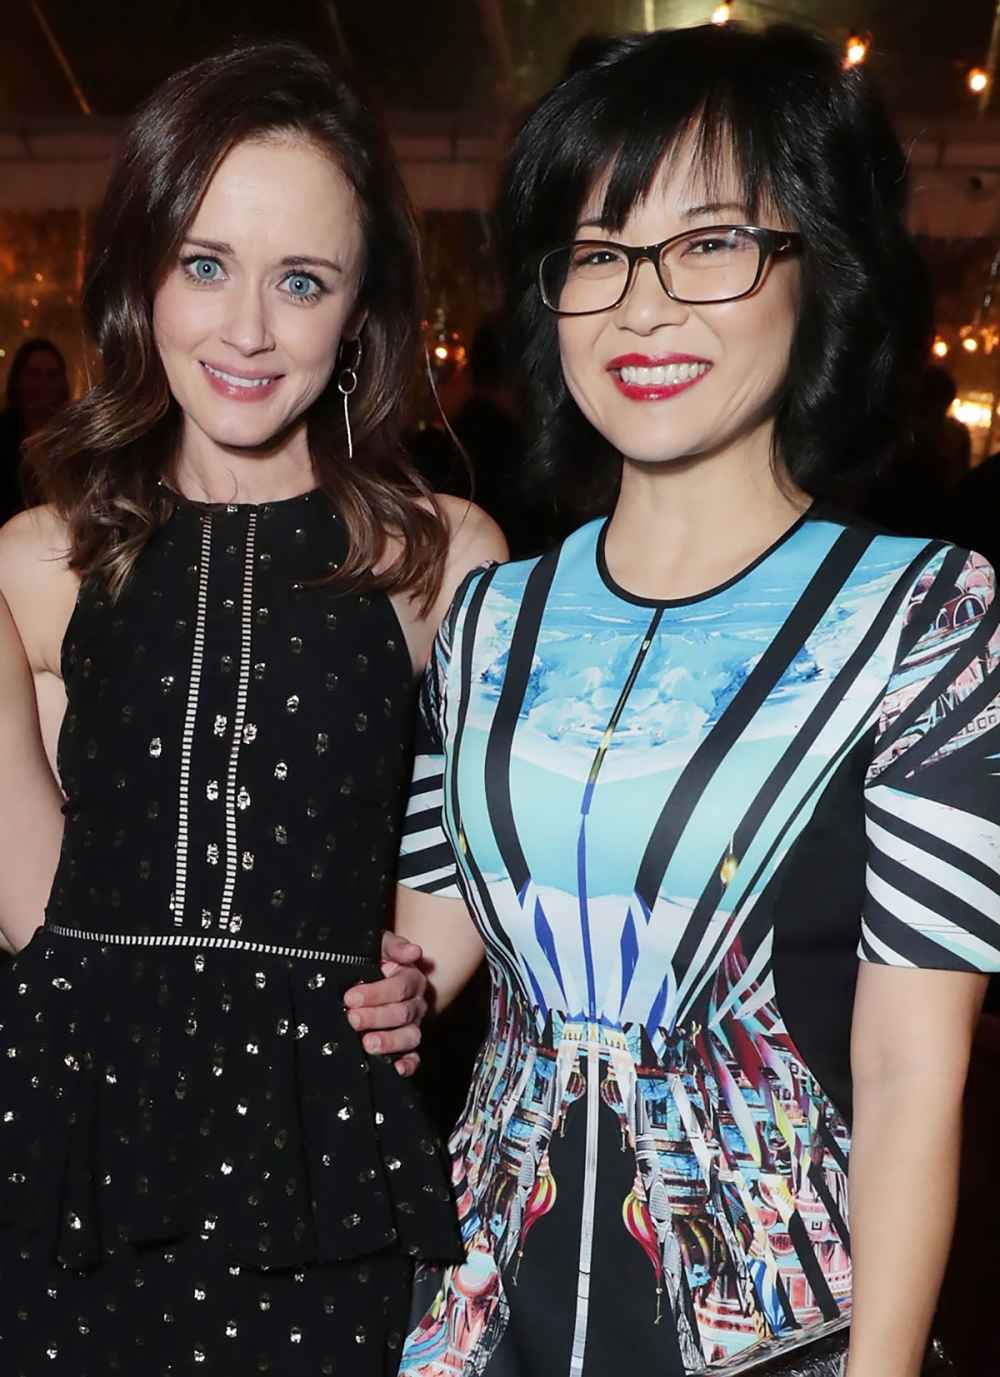 Gilmore Girls’ Keiko Agena: I Wish I Had a Friendship With Alexis Bledel 